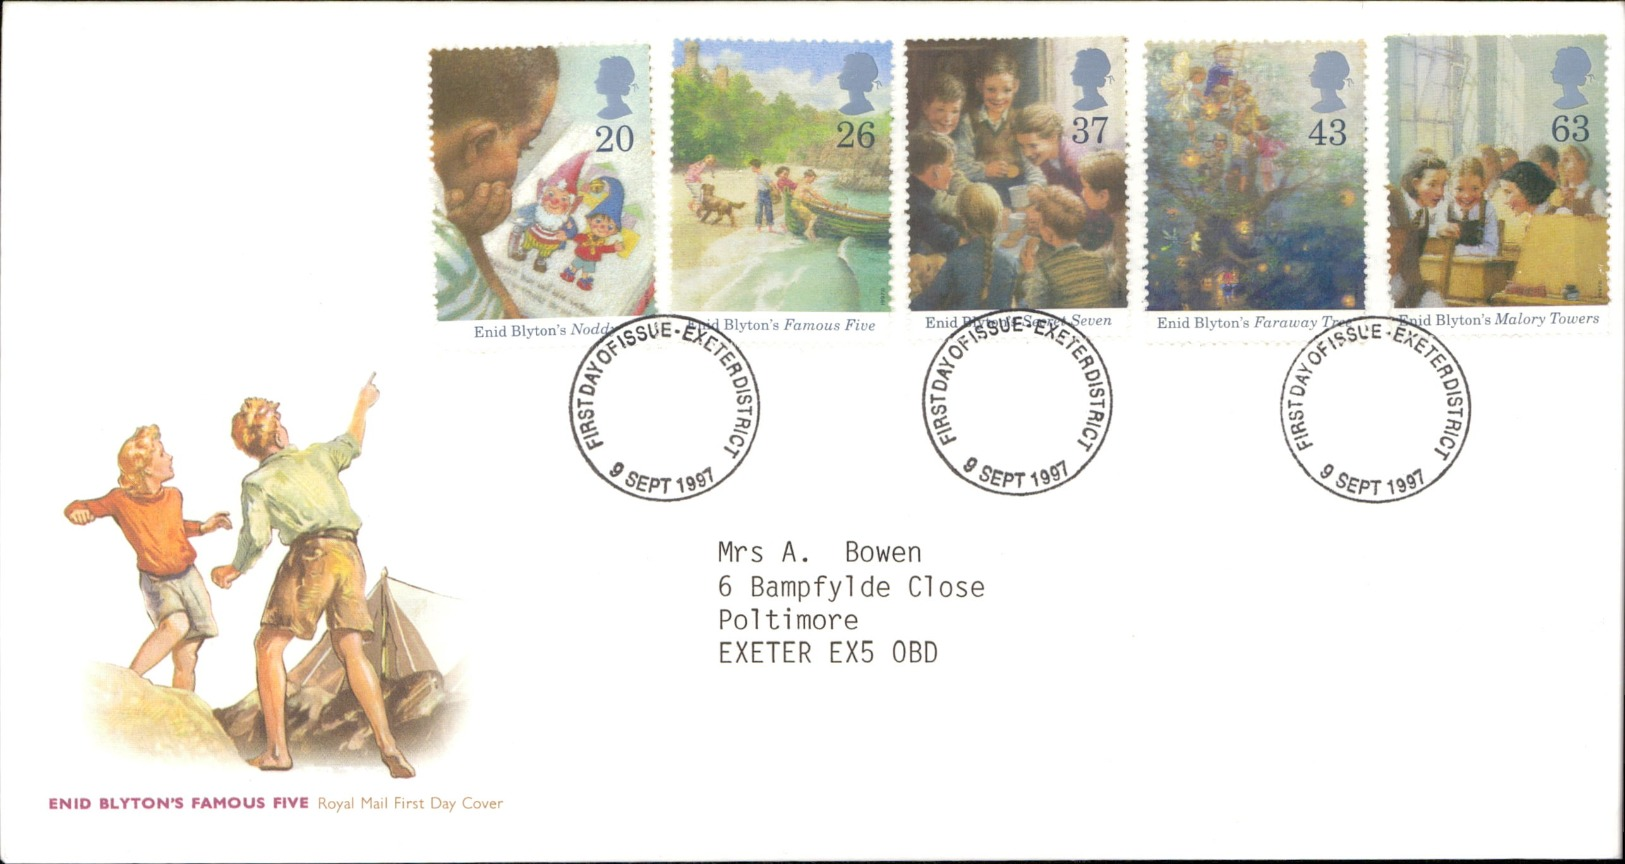 09.09.1997 Enid Blyton's Famous Five Royal Mail First Day Cover FDC Exeterdistrict SHS - 1991-2000 Em. Décimales